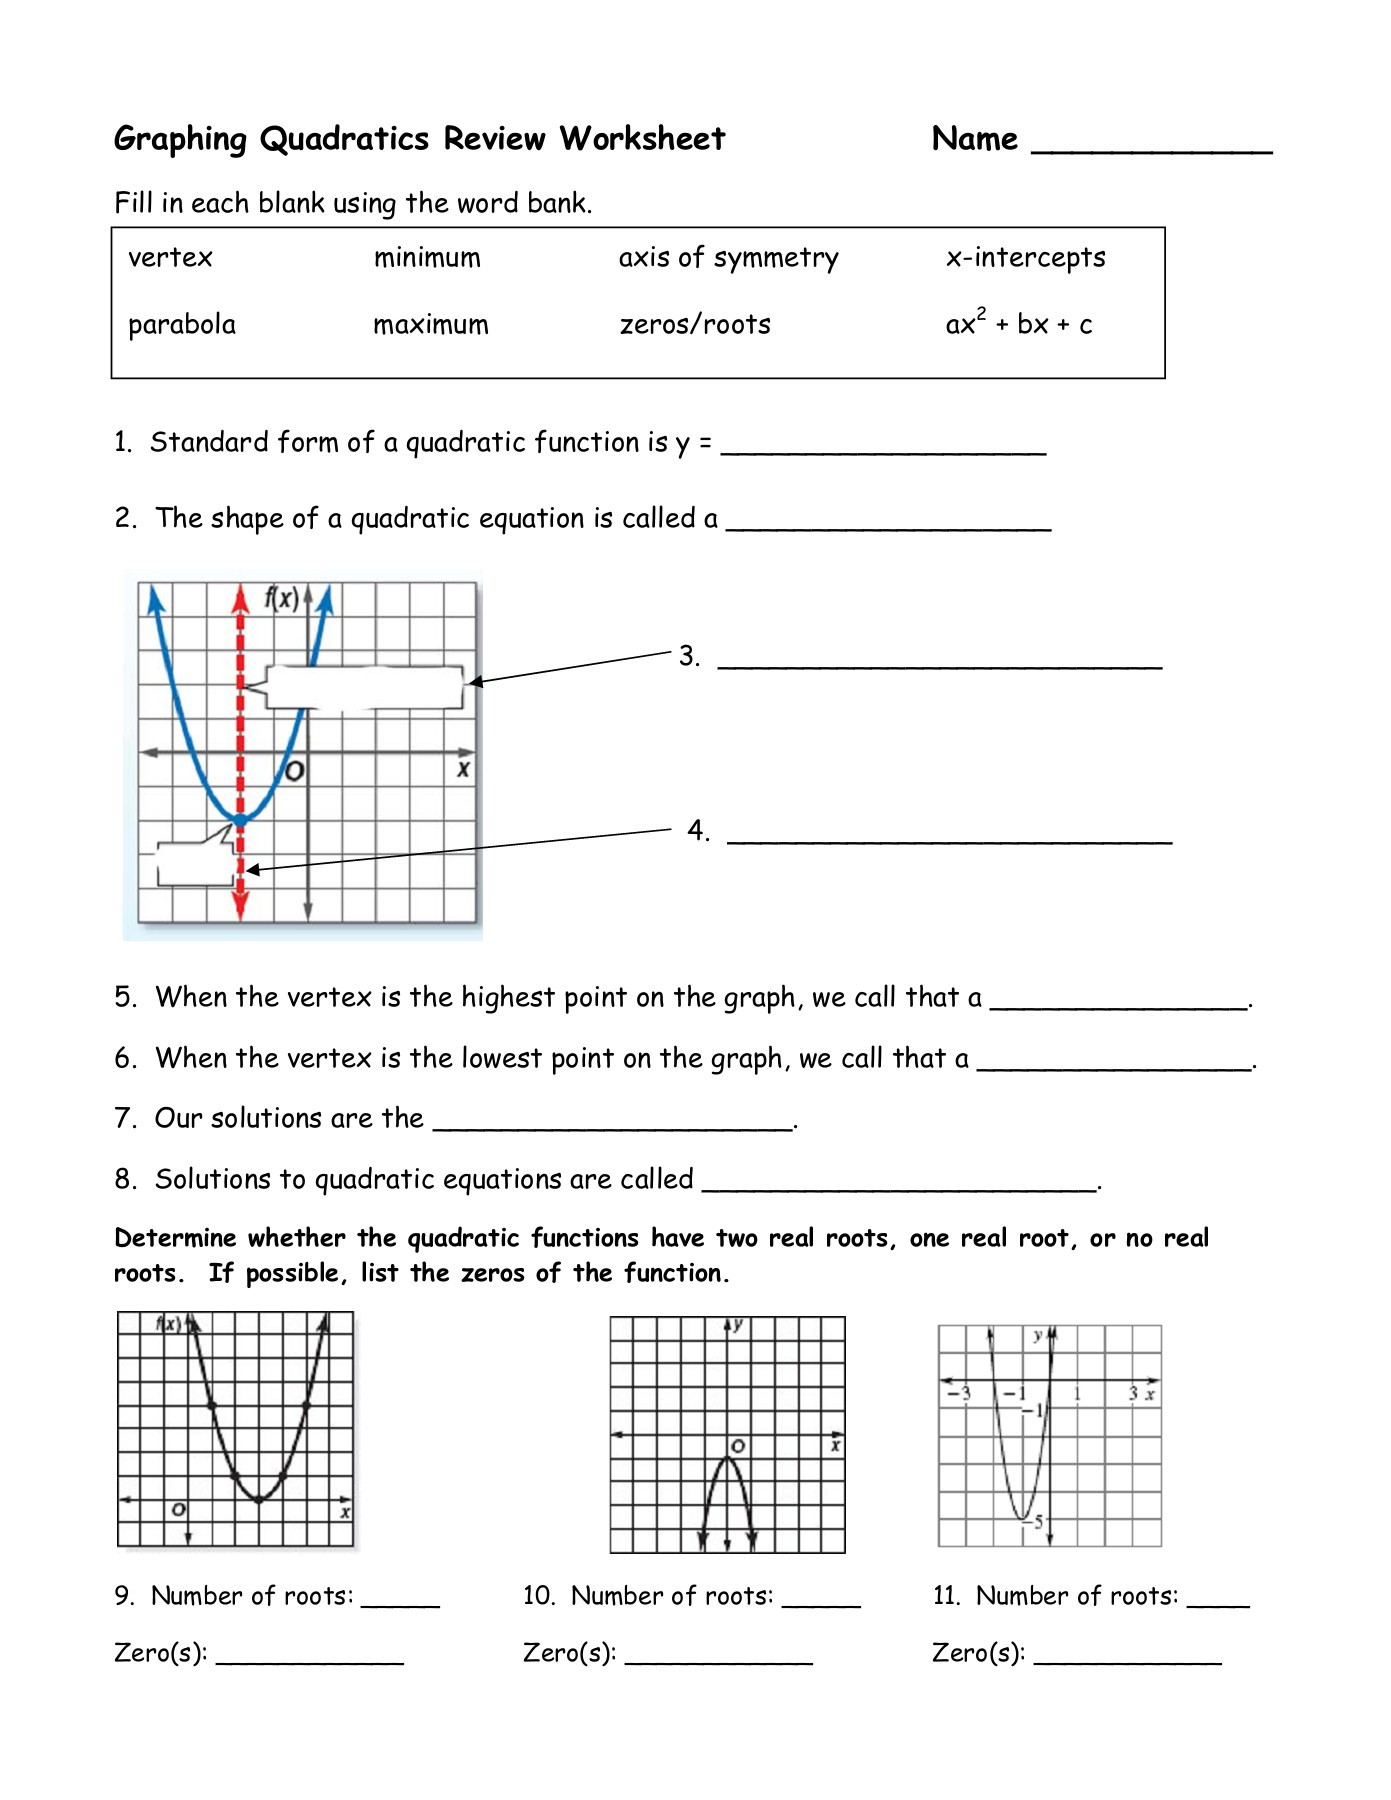 Quadratic Functions Worksheet with Answers Graphing Quadratics Review Worksheet Name Wikispaces Pages